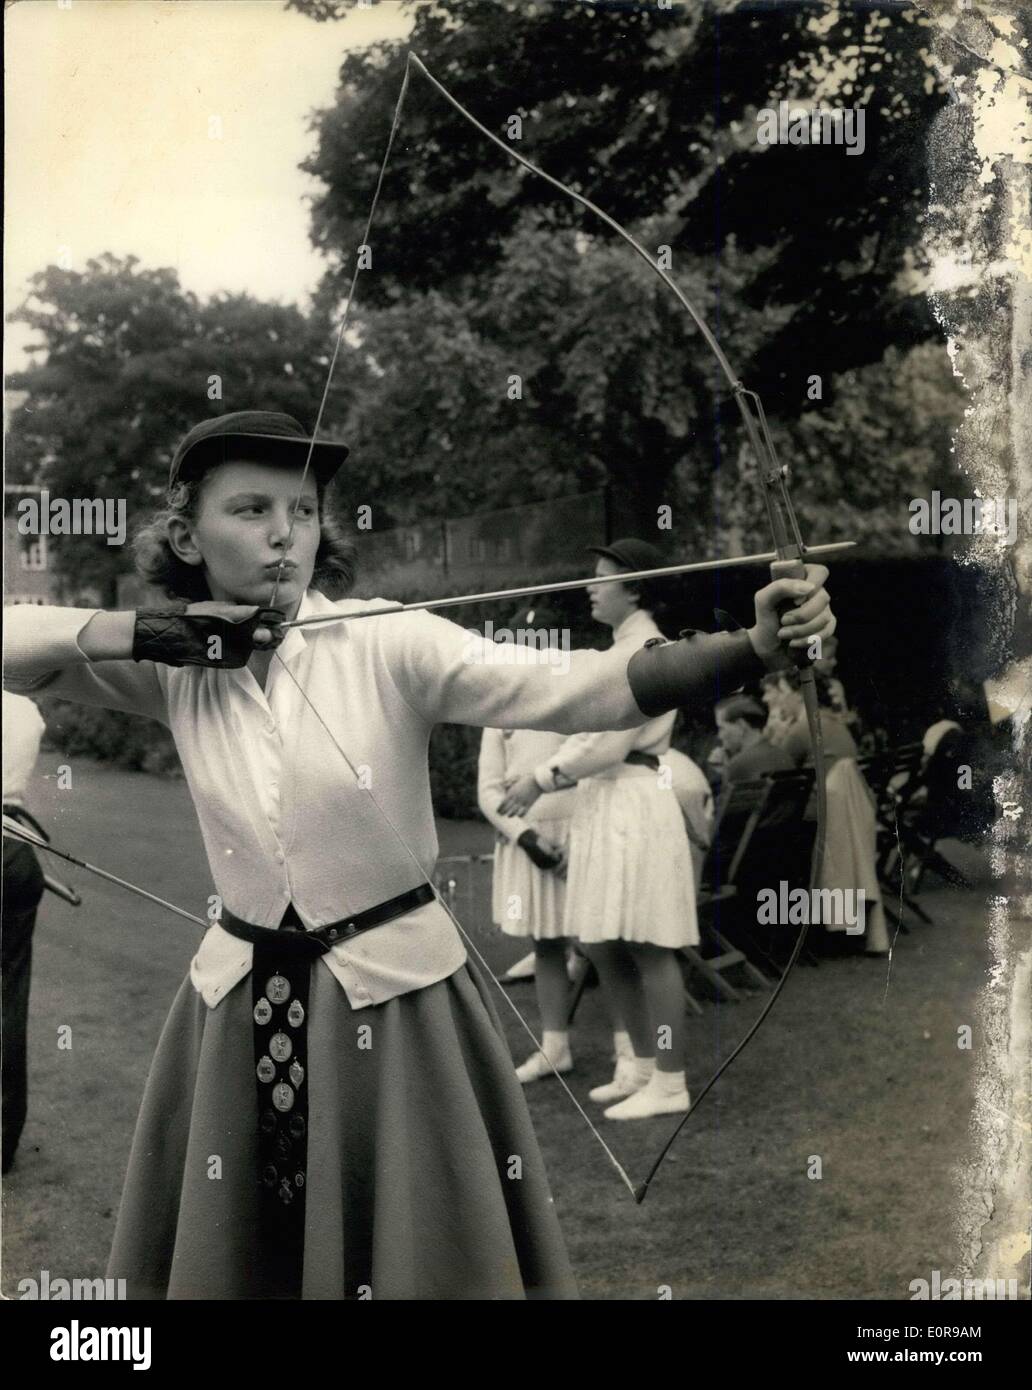 Aug. 29, 1958 - Boys and Girls Archery Championships.. The boys and girls Archery Championships opened this afternoon at the Royal Toxophillite society ground, Hydepark. Photo shows Susan Osborne, age 13 , of the Colchester Archery Club, who has won the championship in 1956-57, when she broke two records, displaying 14 senior championship medals during the competition today. Stock Photo